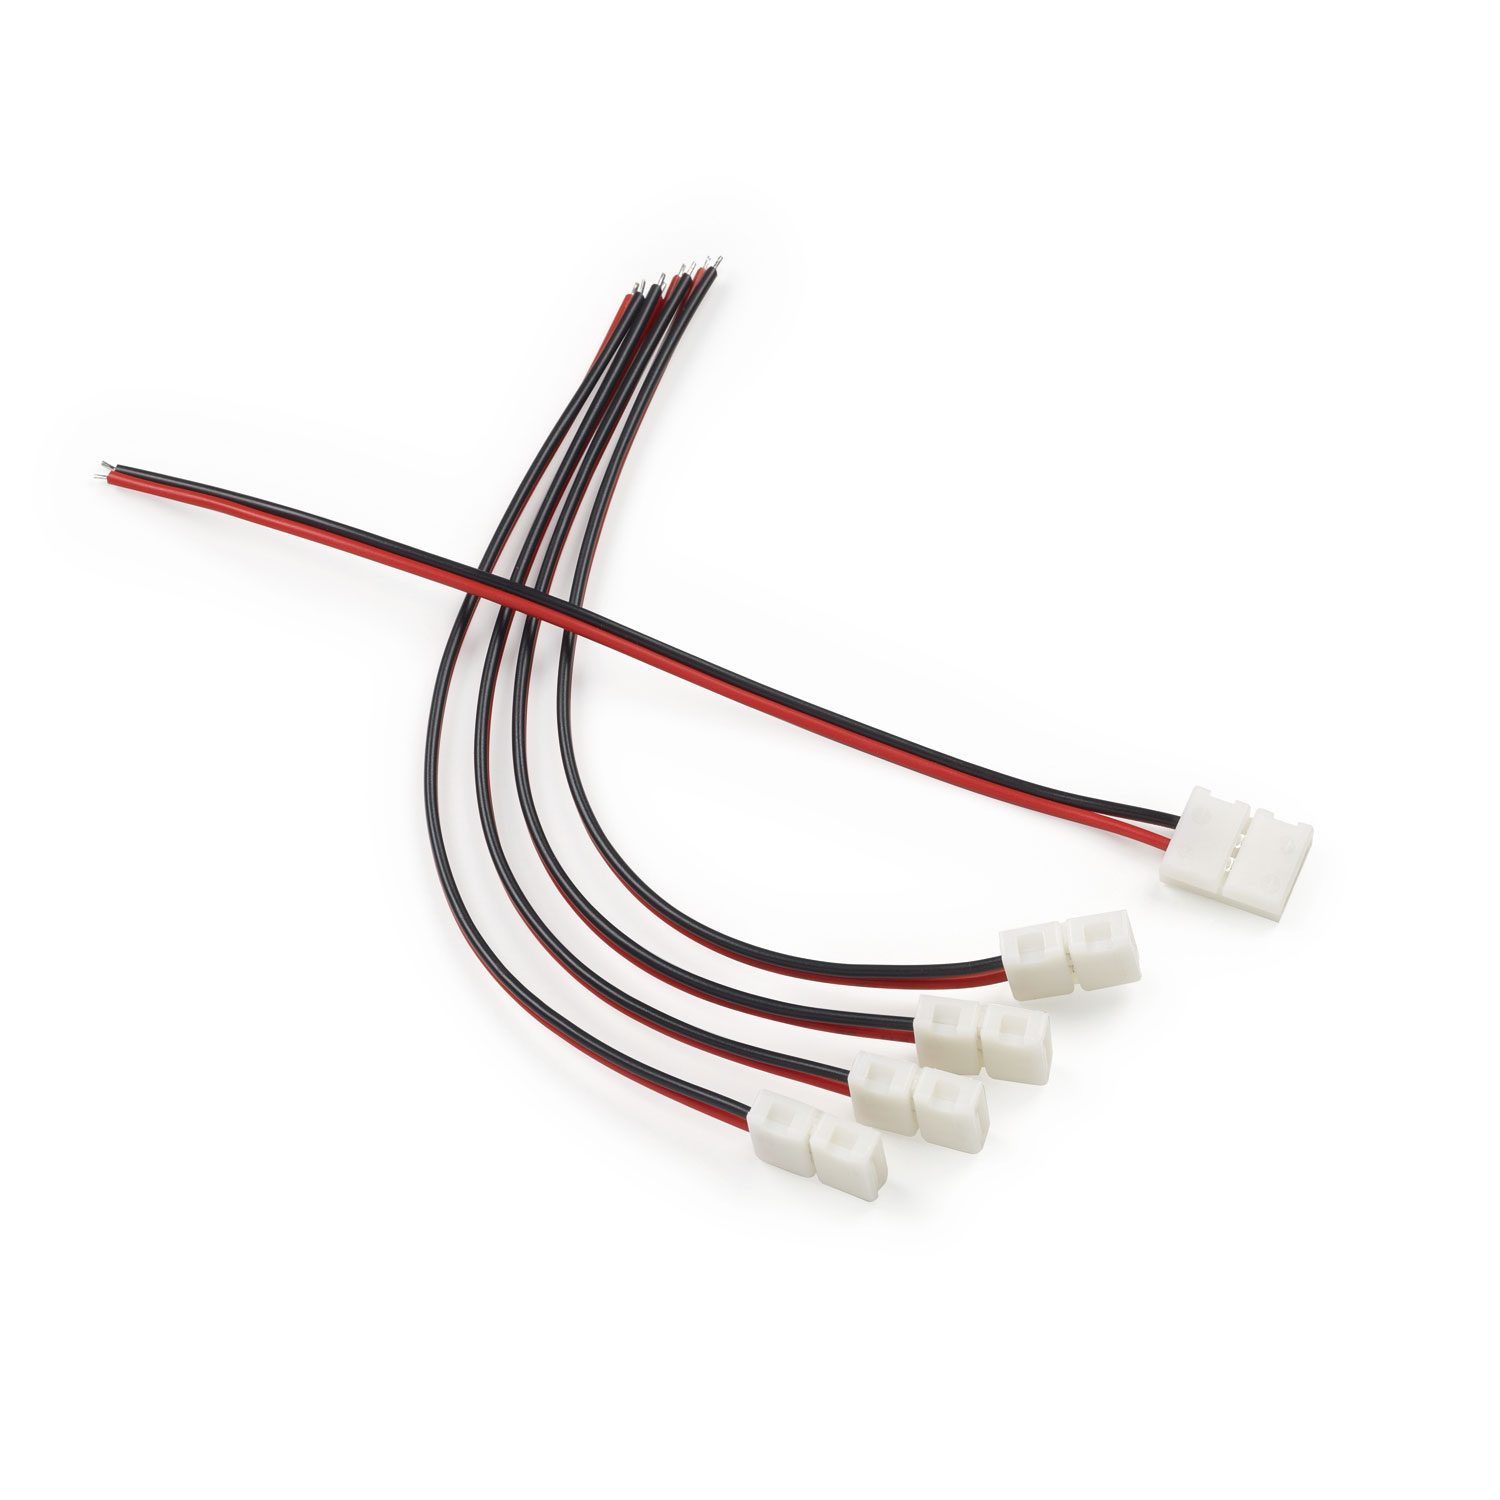 LEDFLEX IN MP / HP SUPPLY CABLE SET